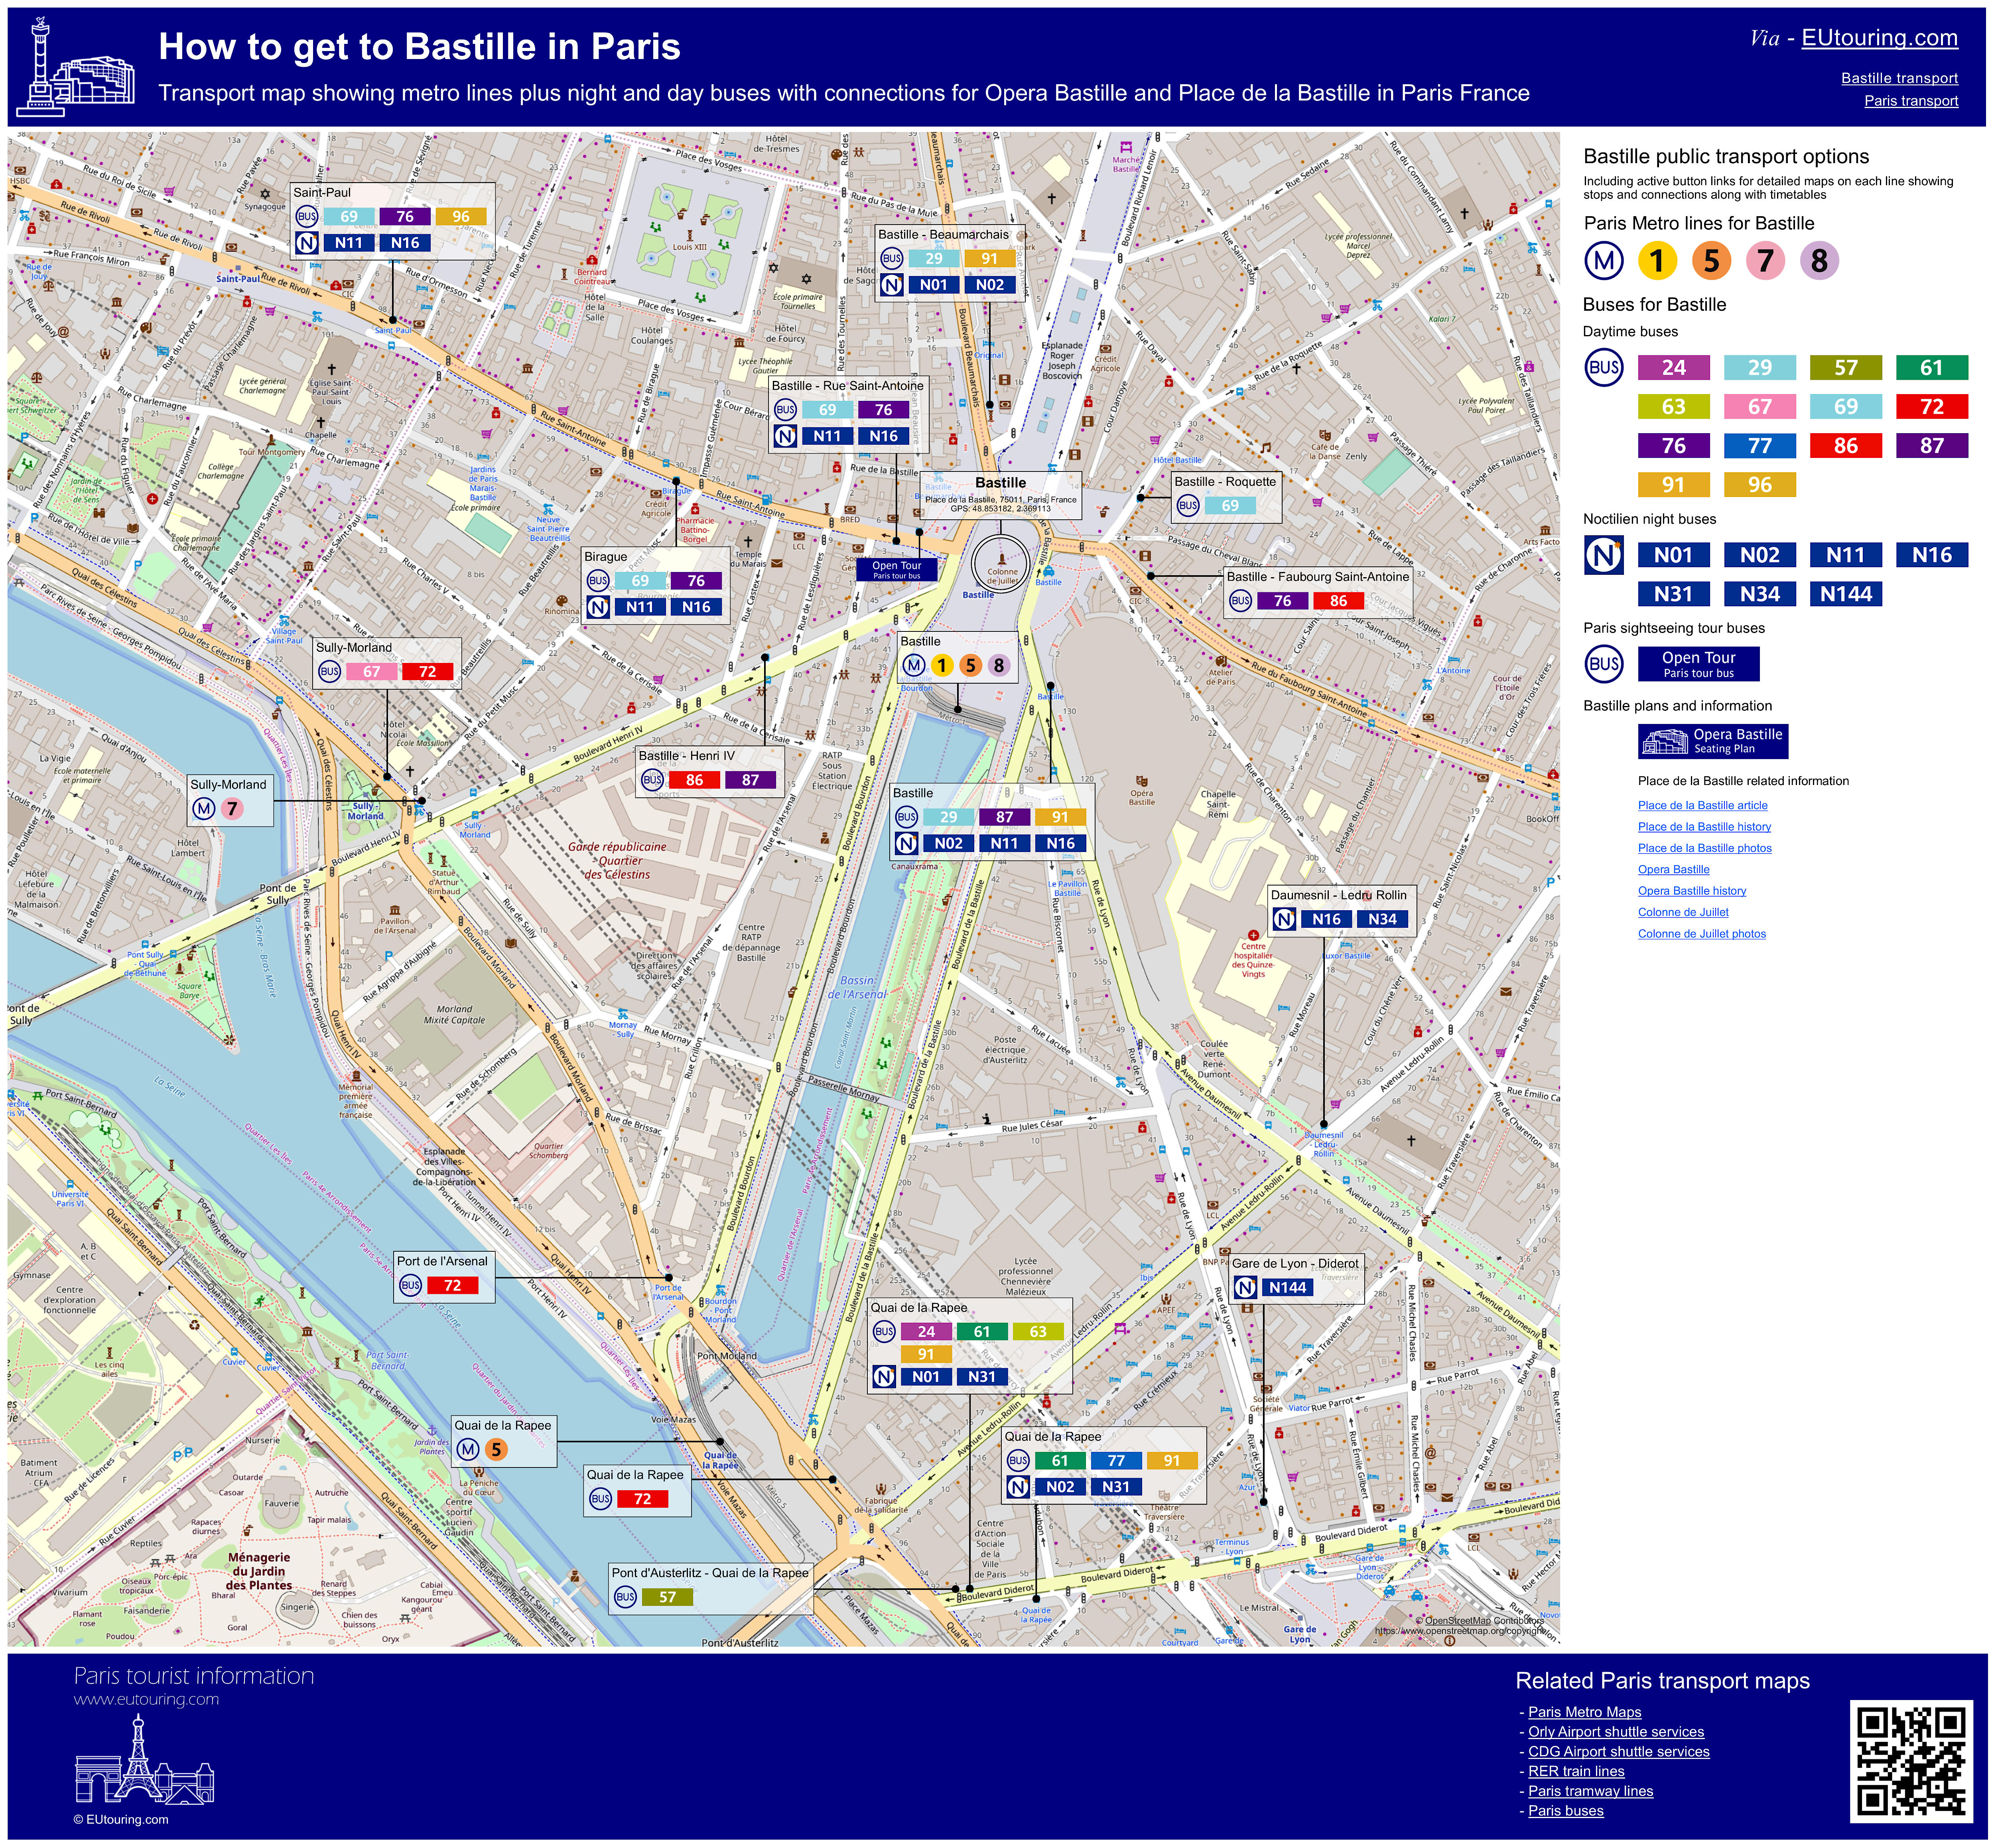 How to get to Louis Vuitton in Paris by Metro, Bus, RER or Train?